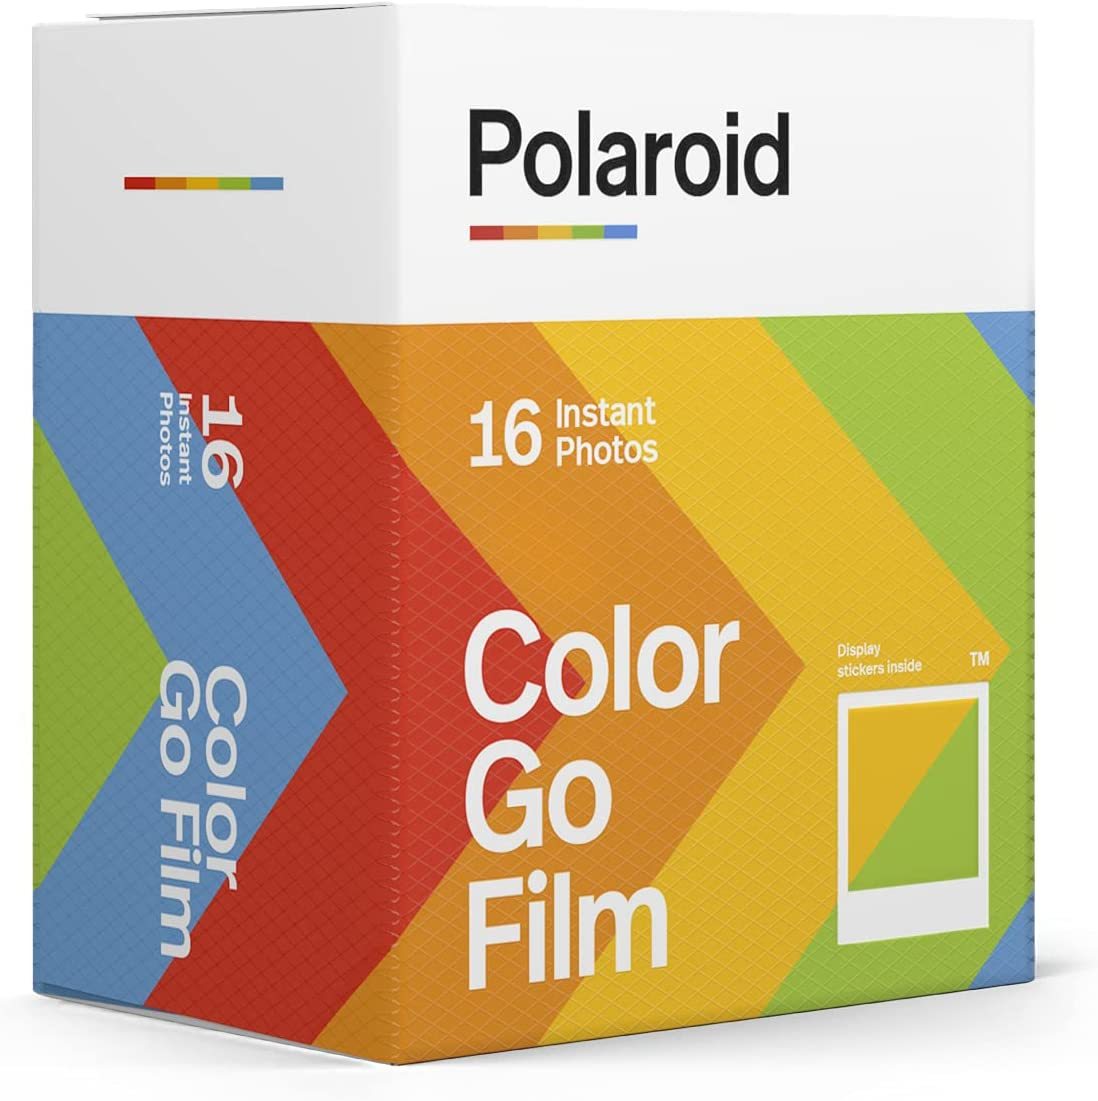 Primary image for Polaroid Go Color Film - Double Pack (16 Photos) (6017) - Only Compatible With